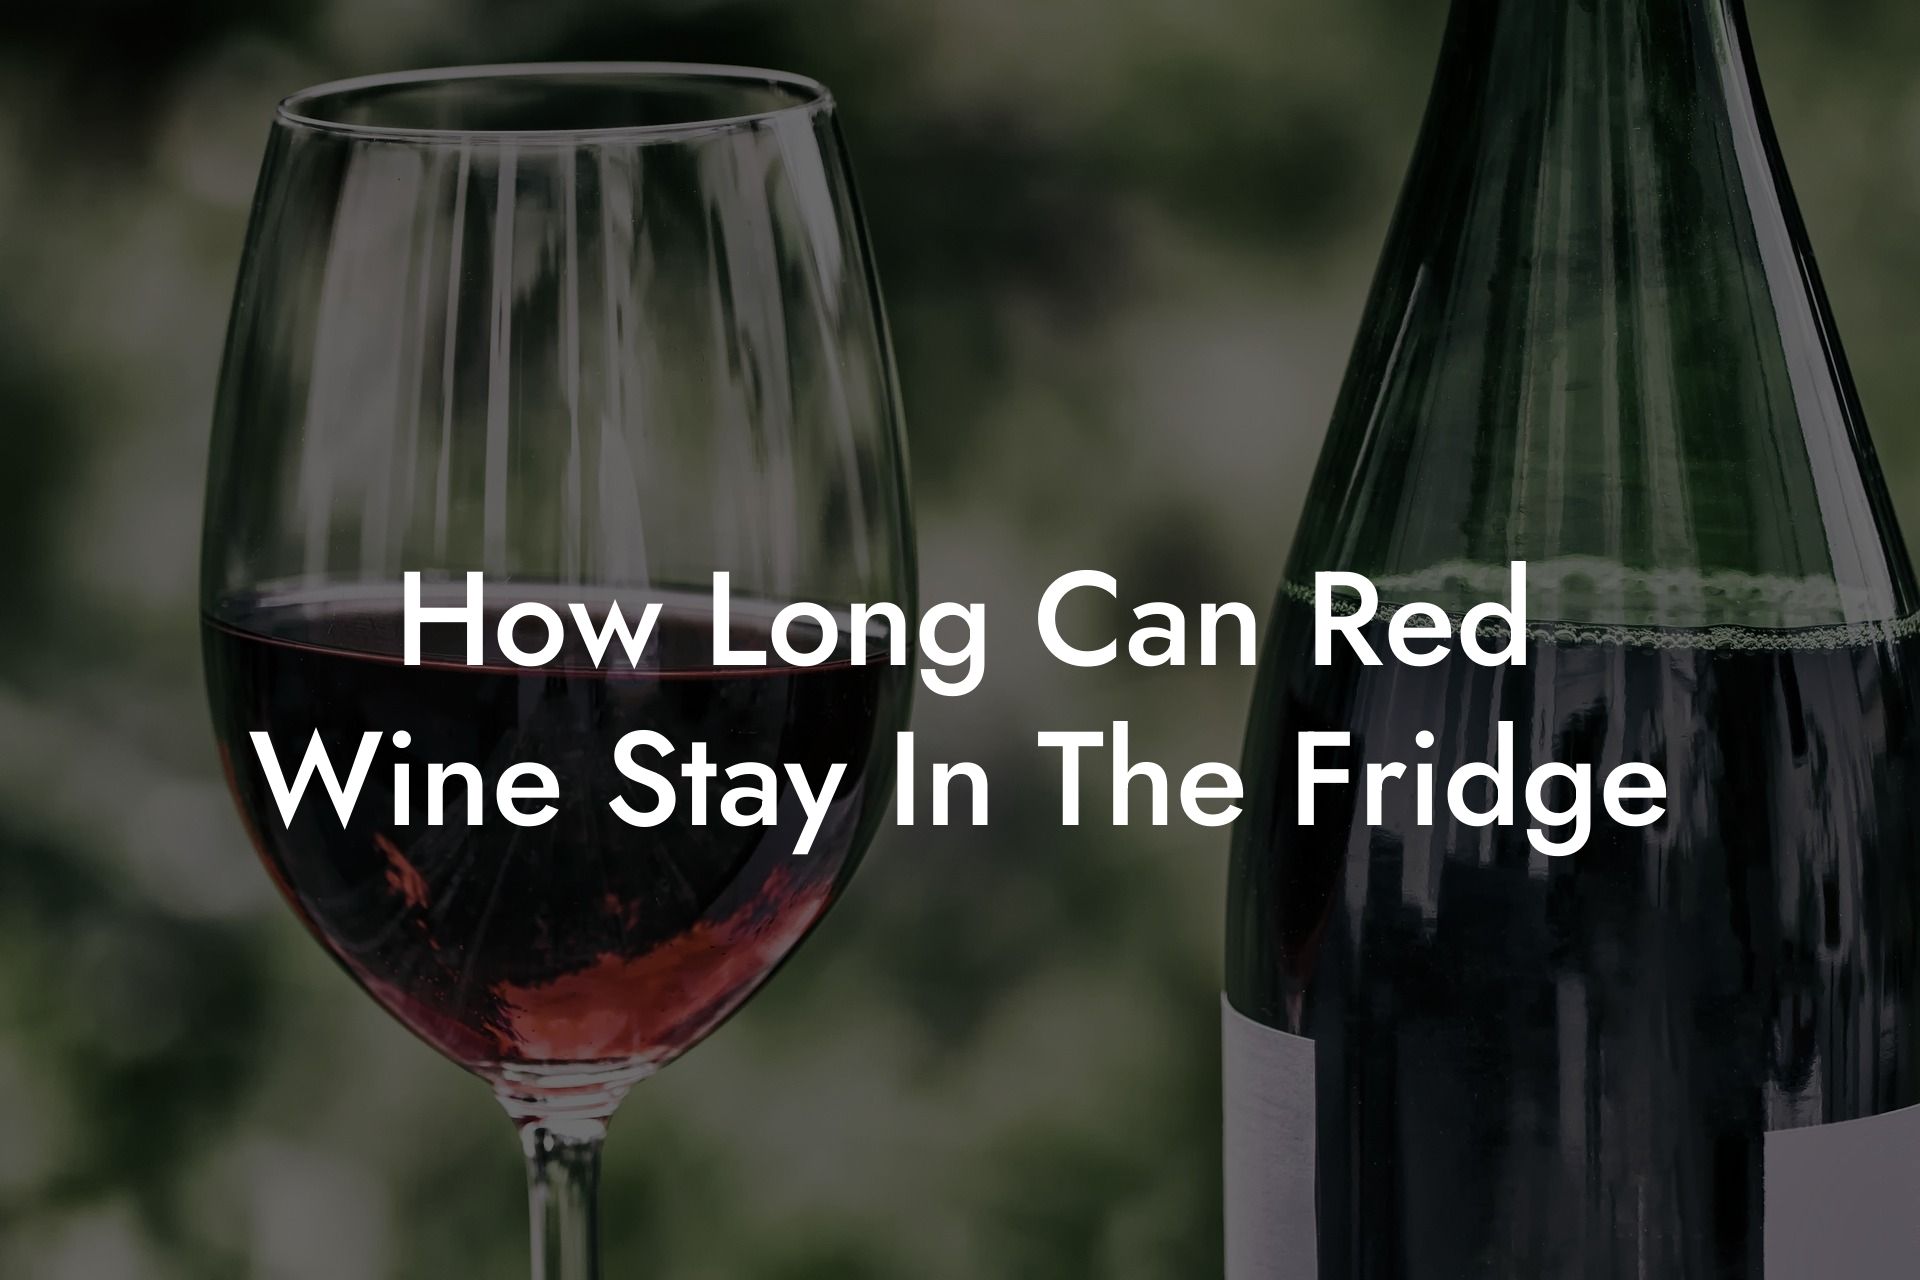 How Long Can Red Wine Stay In The Fridge